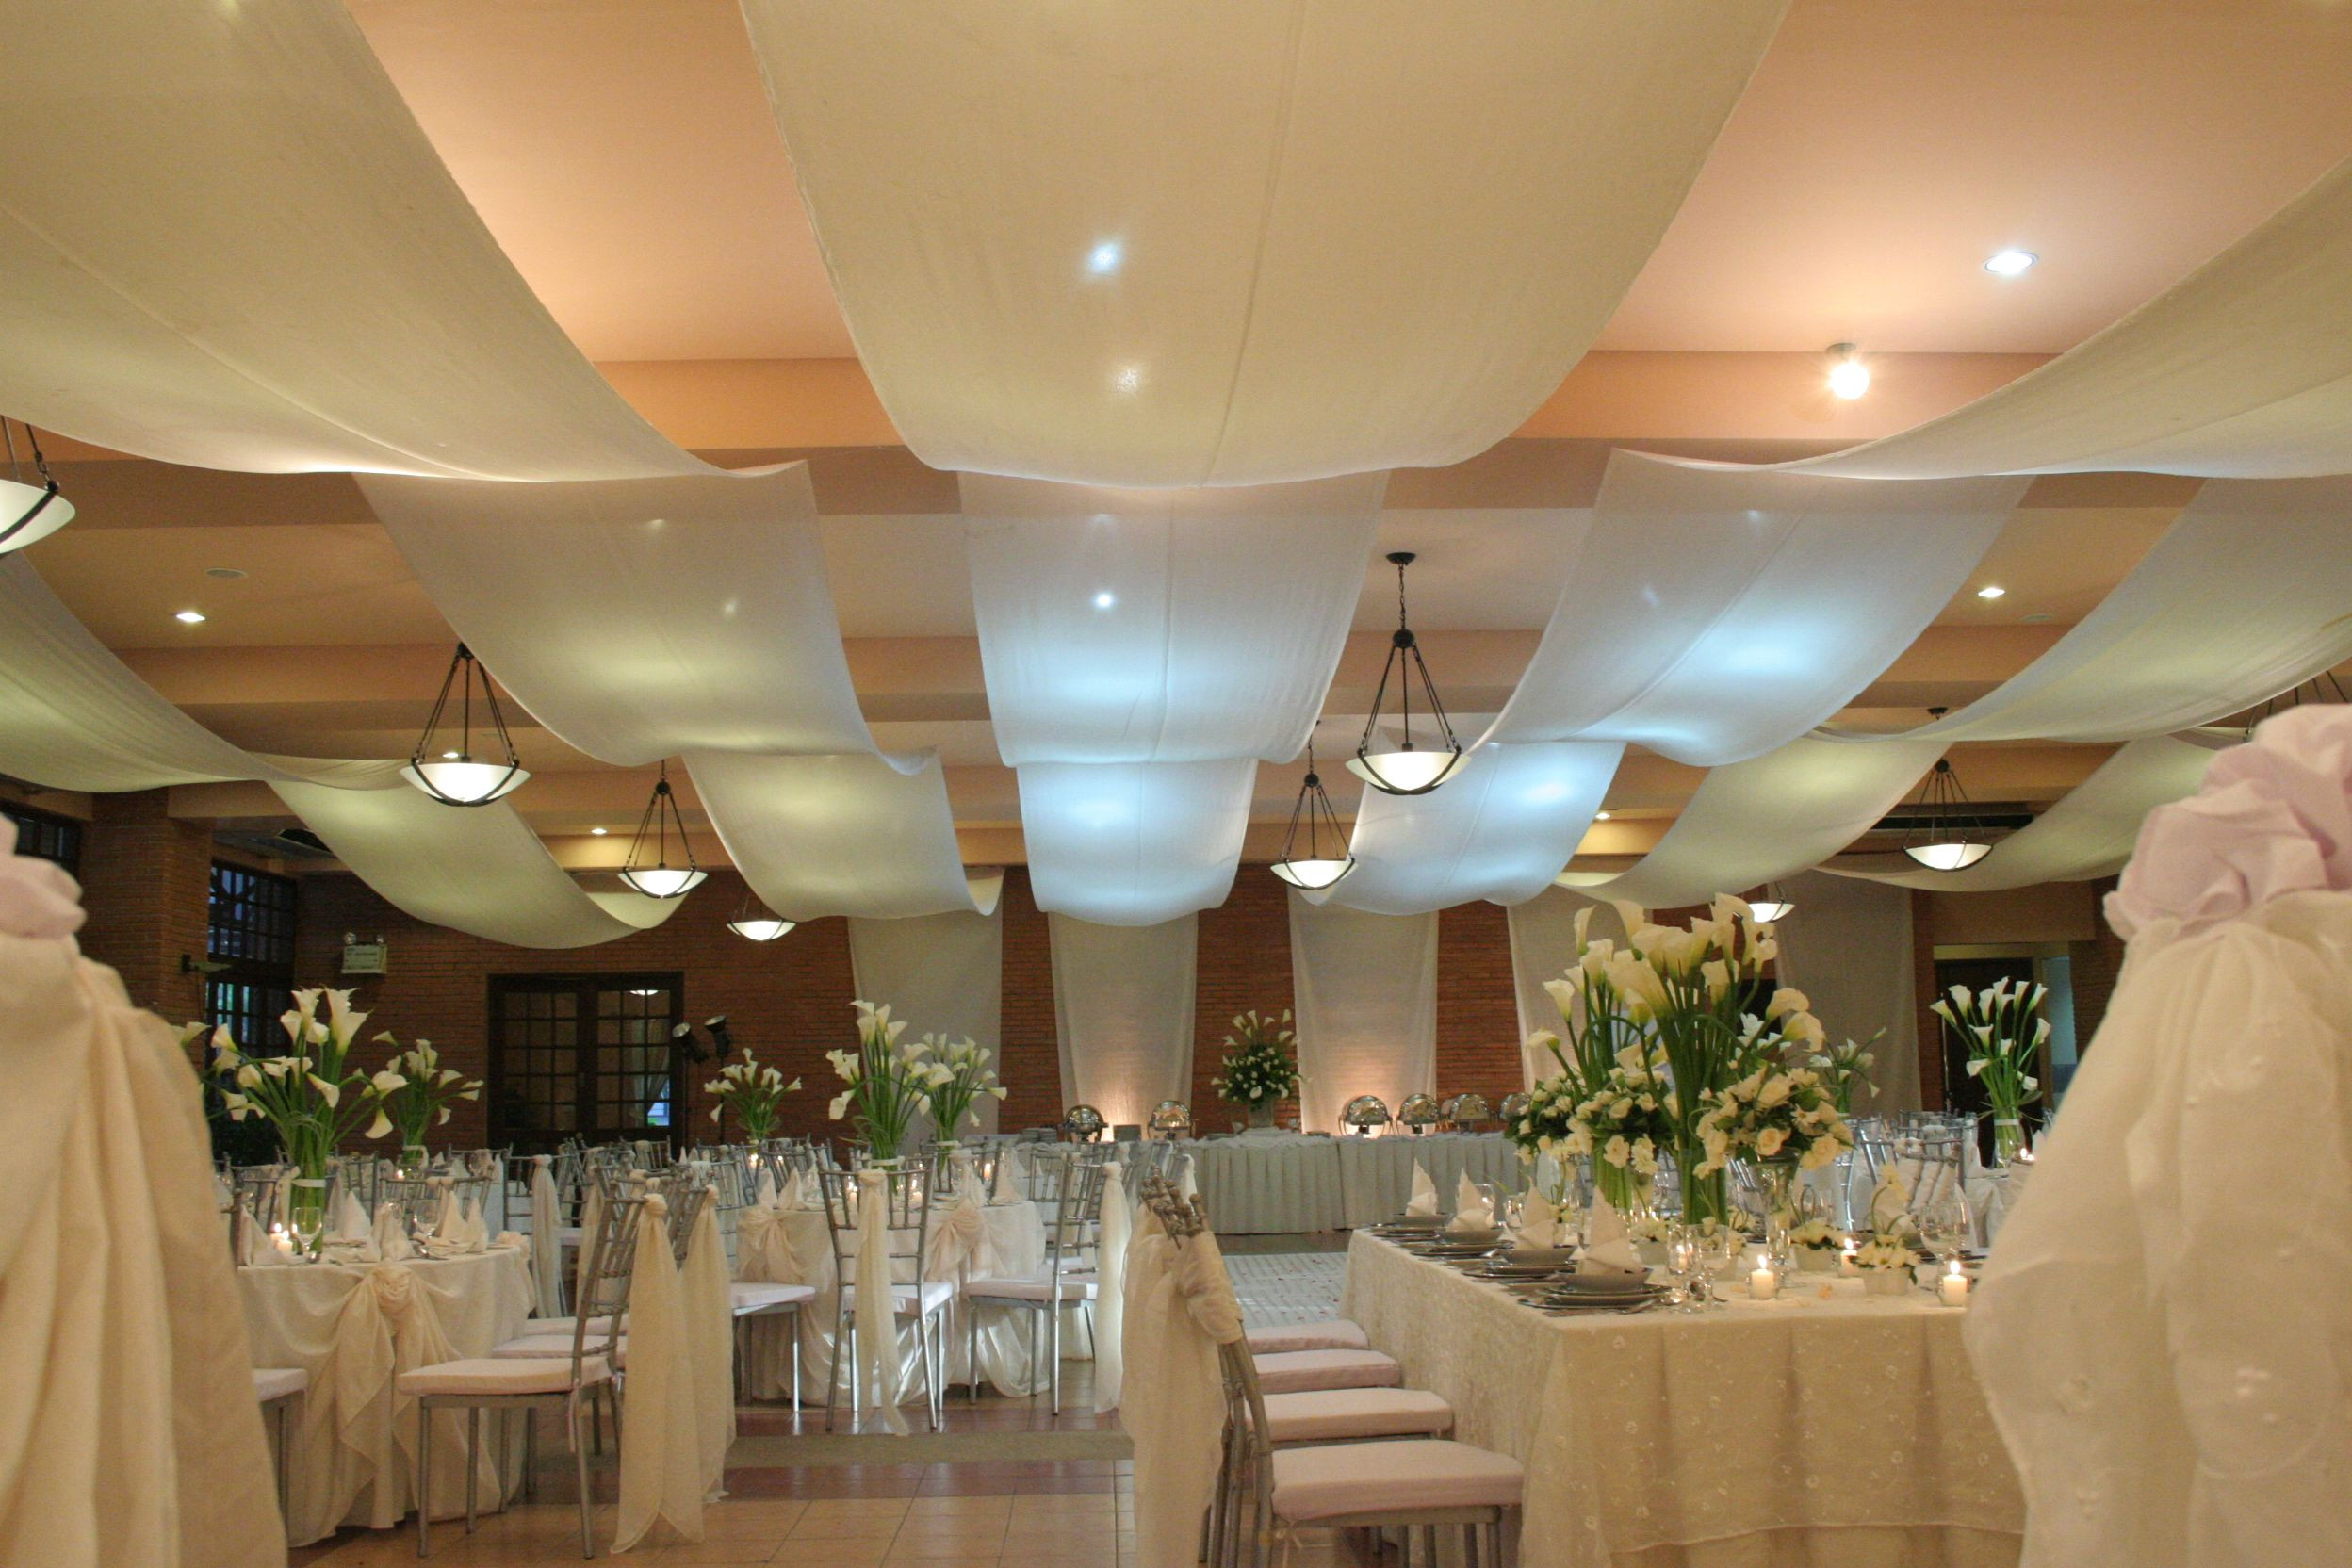 DIY Ceiling Draping For Weddings
 Really like this look